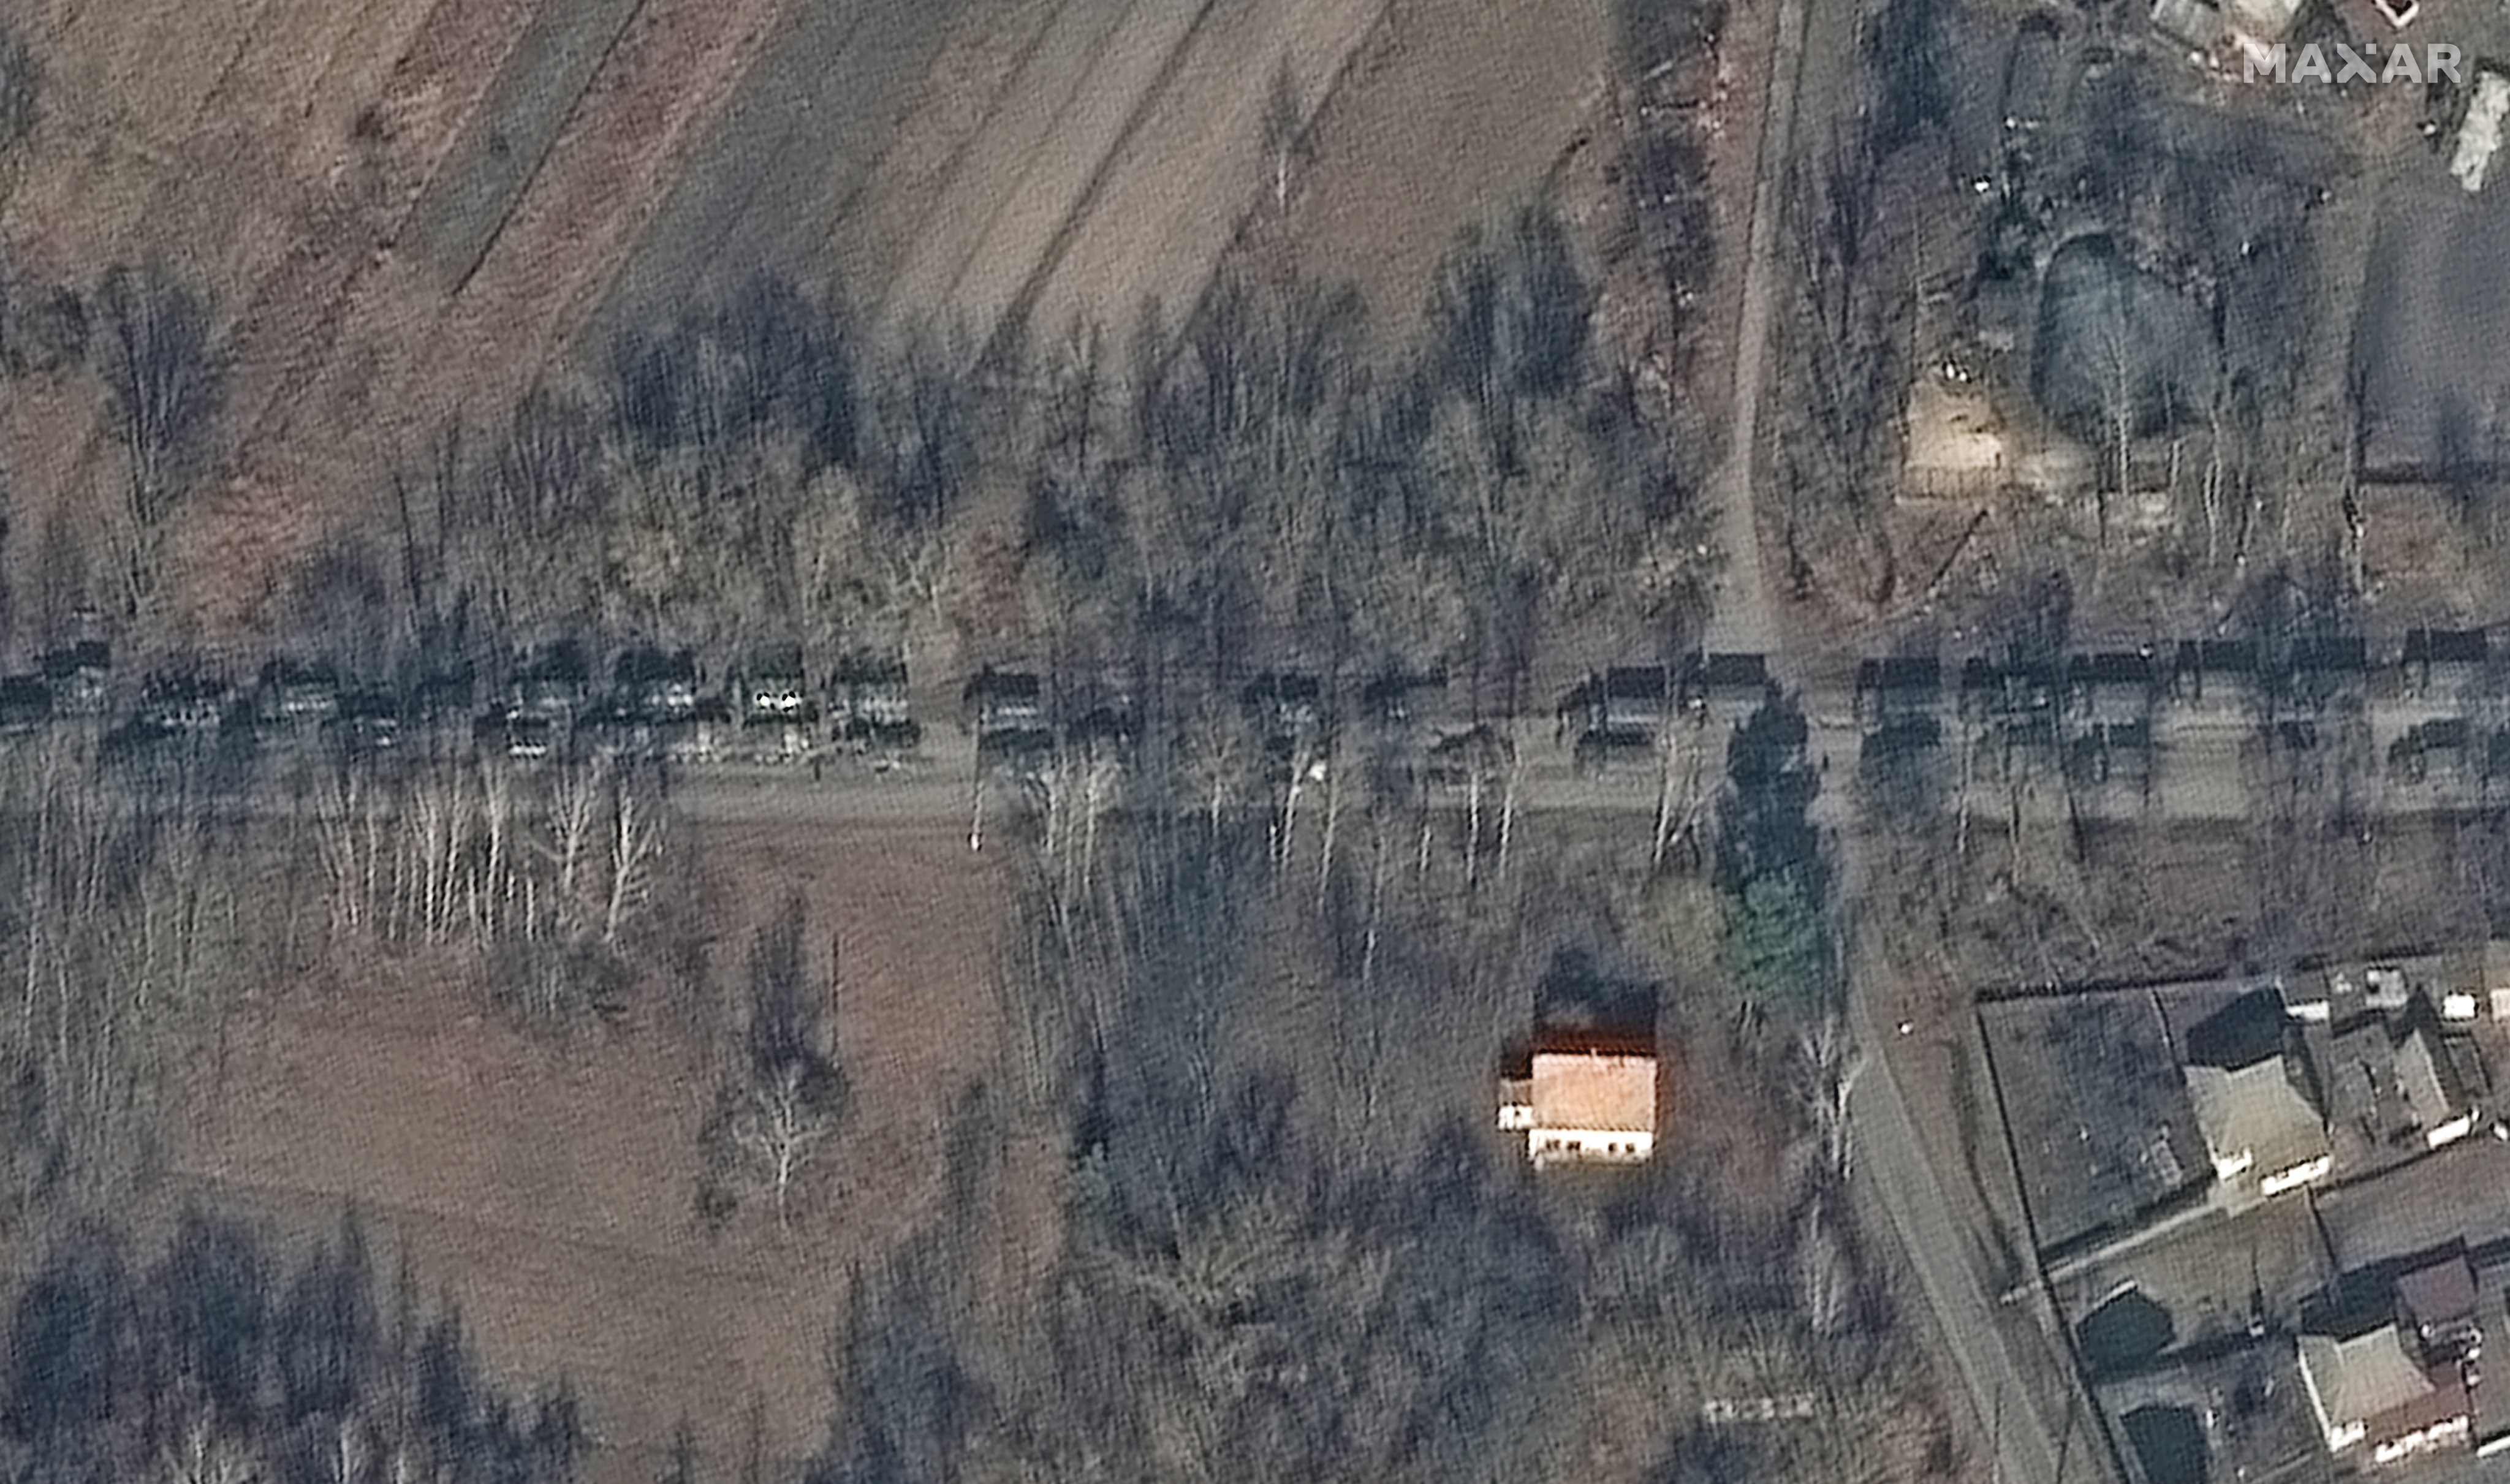 RUSSIANS INVADE UKRAINE -- FEBRUARY 27, 2022:  02 Maxar high-resolution satellite close up view of armored equipment and ground forces convoy, Ivankiv, Ukraine.  27feb2022_wv3.  Please use: Satellite image (c) 2022 Maxar Technologies.